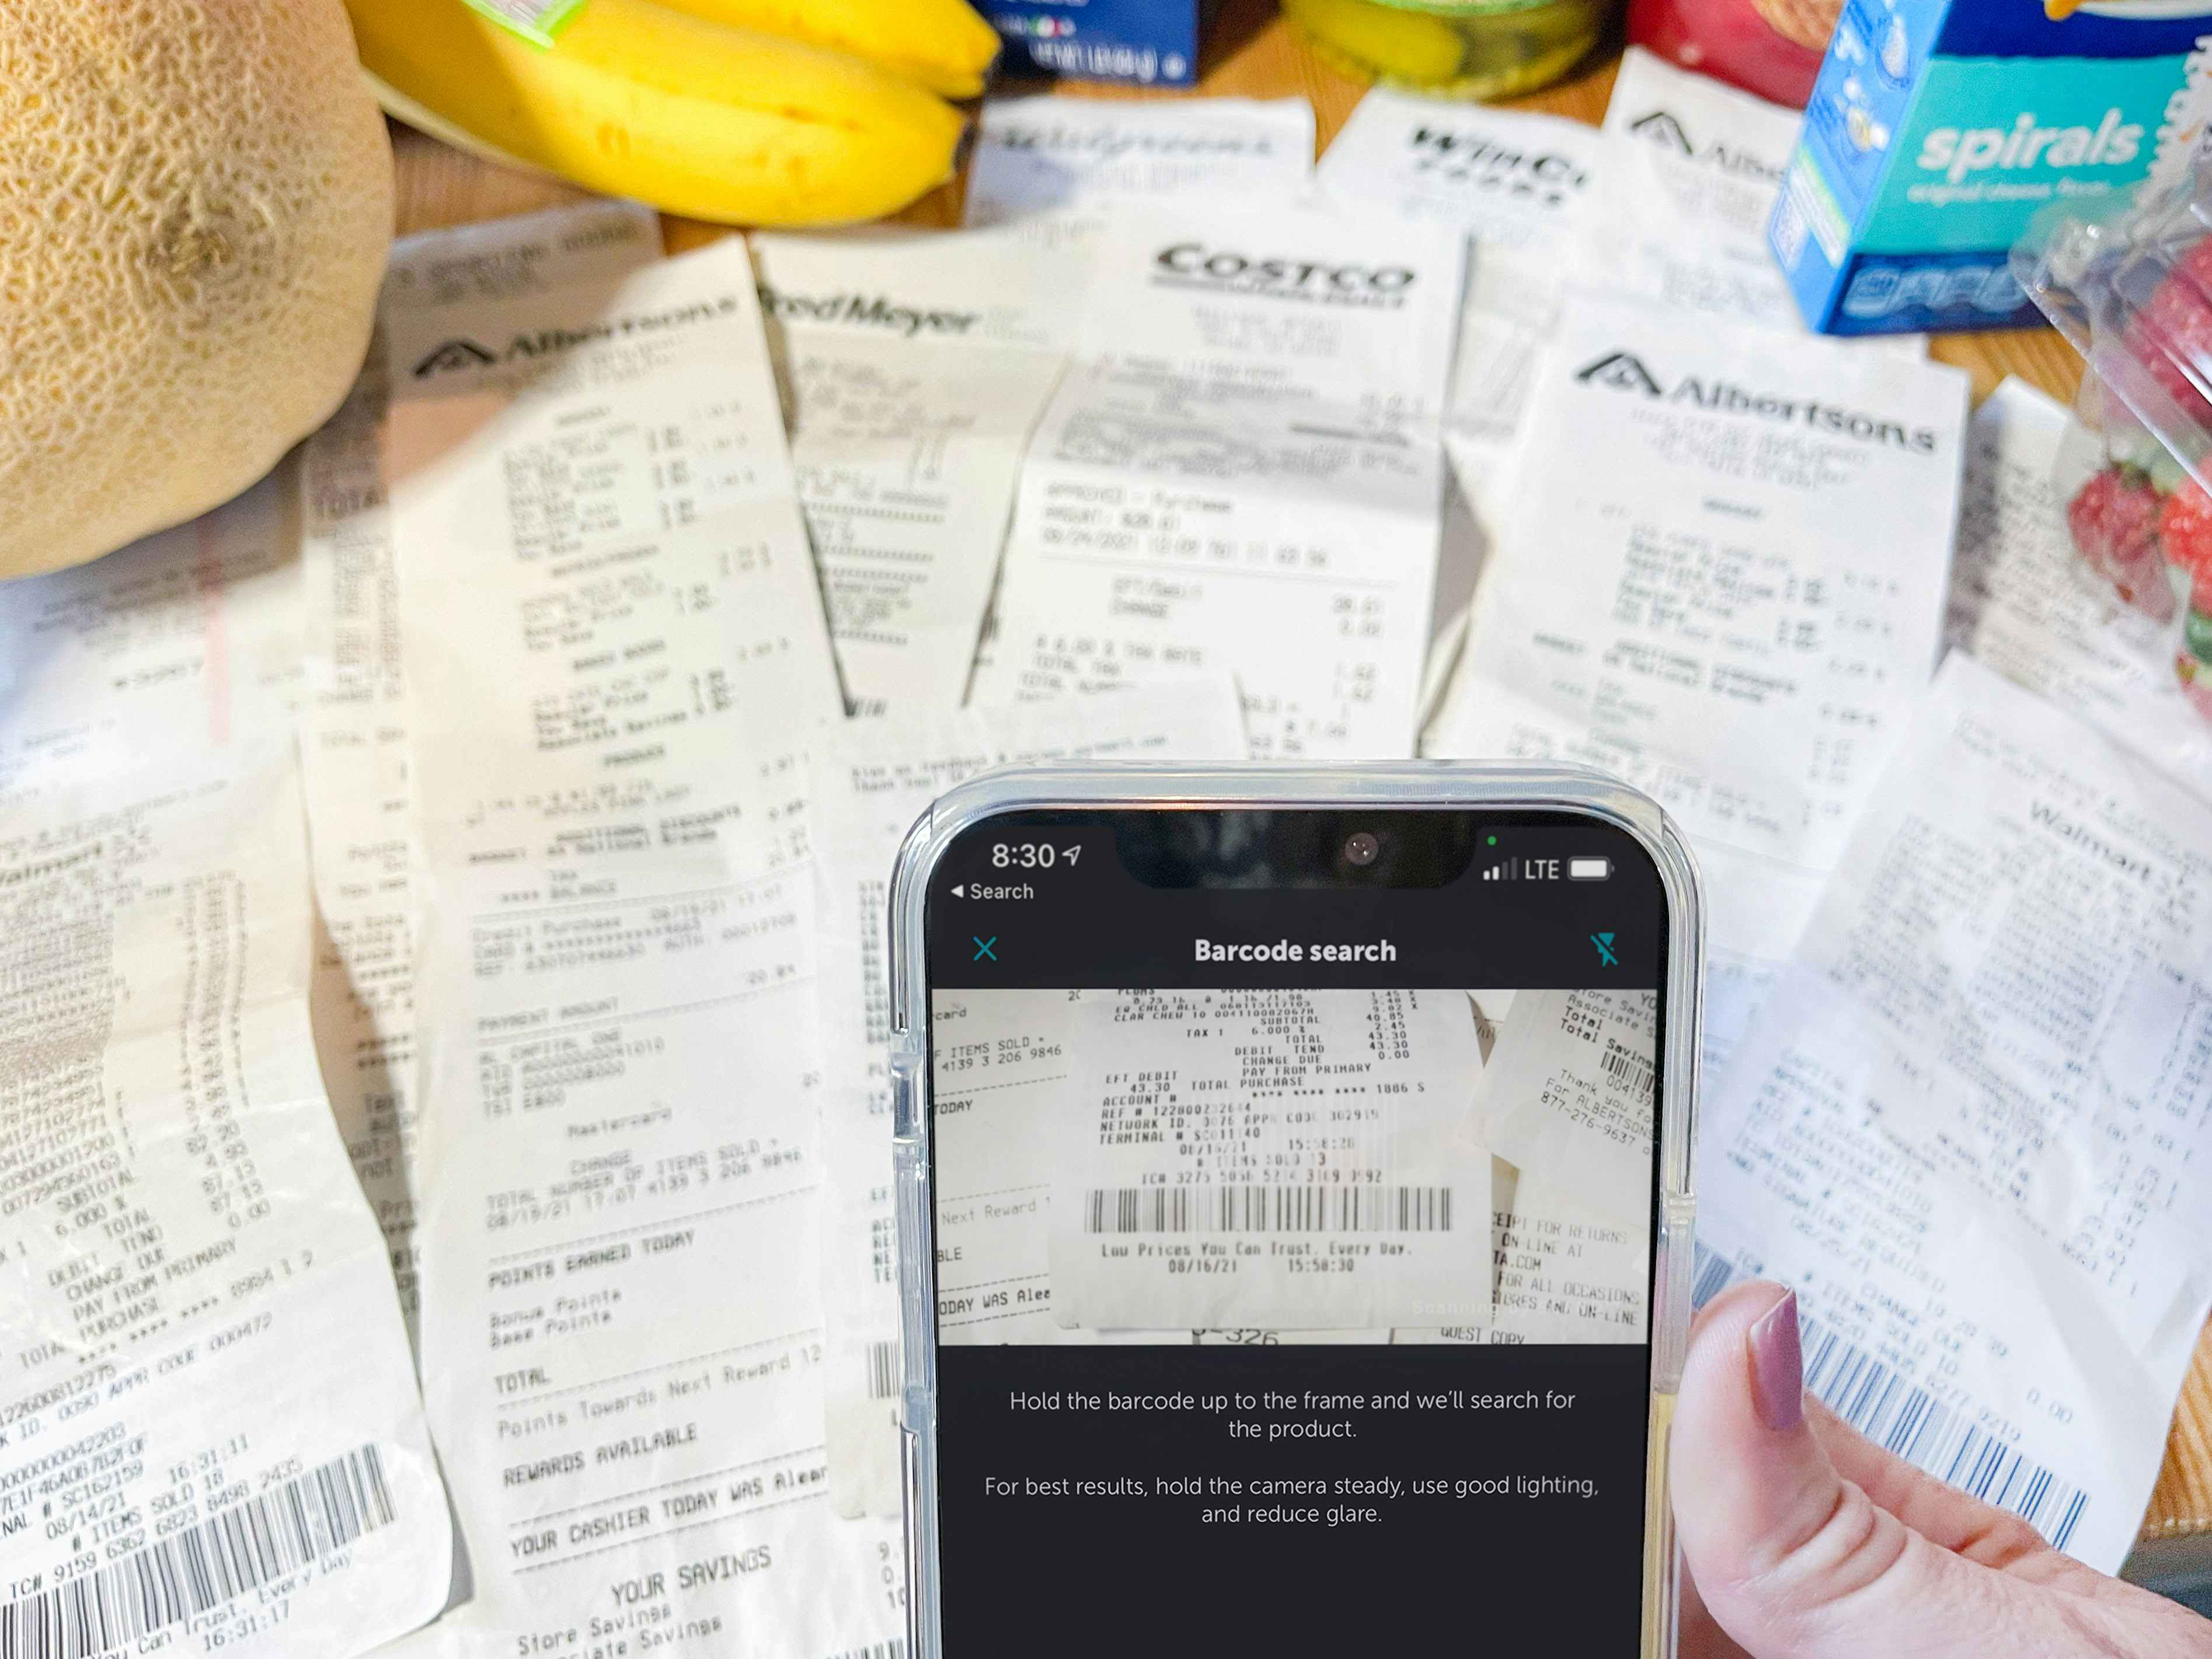 cellphone being held with app in front of groceries and other receipts